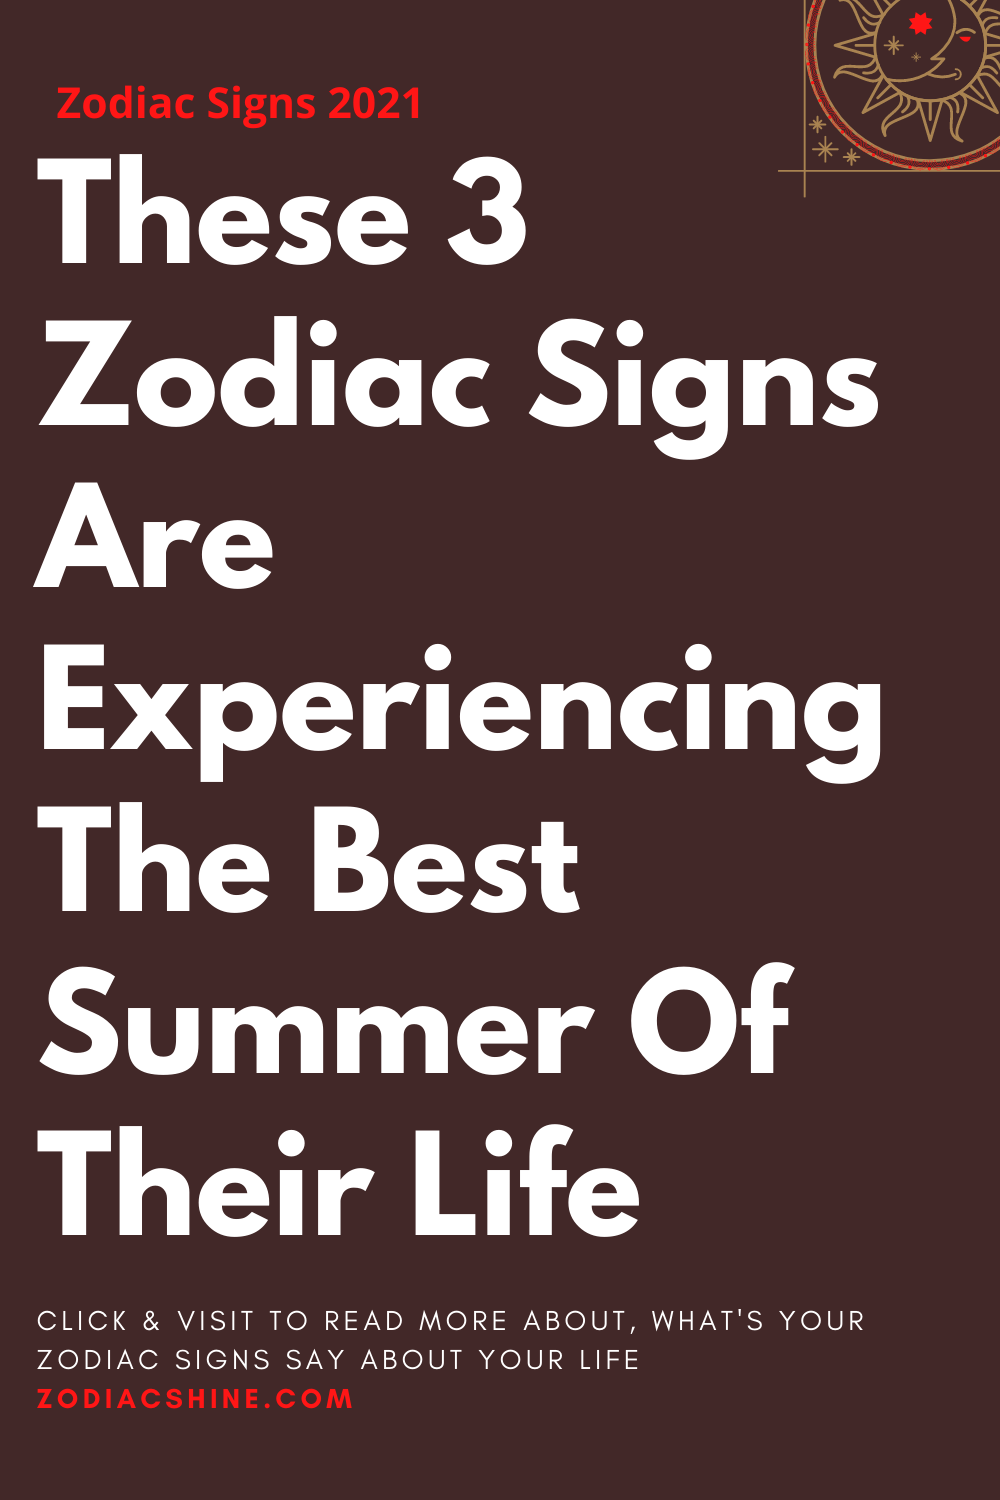 These 3 Zodiac Signs Are Experiencing The Best Summer Of Their Life